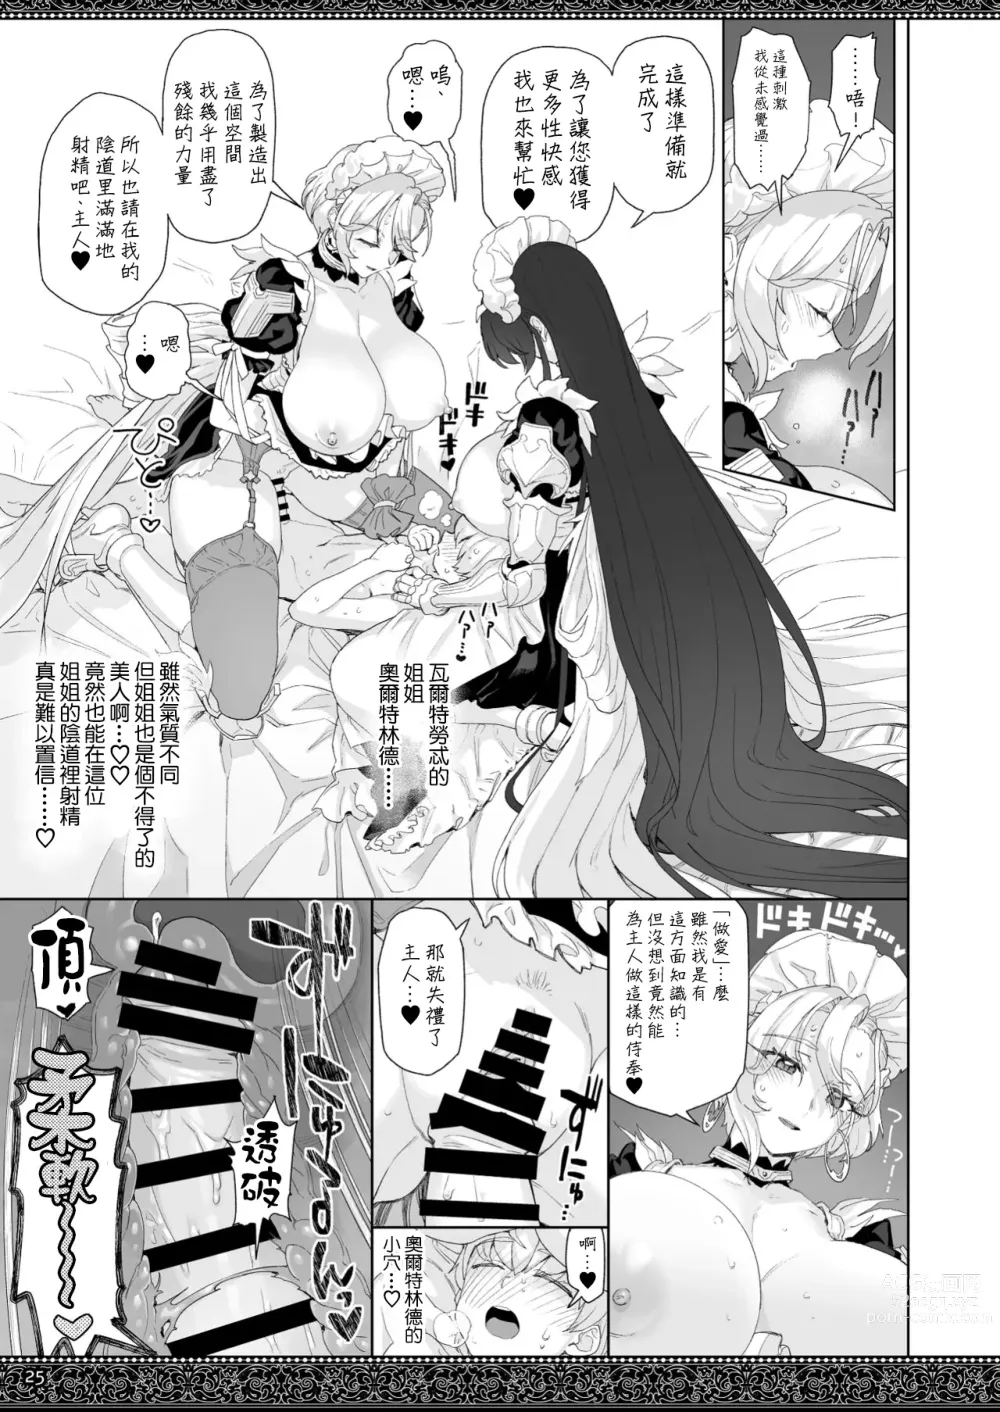 Page 25 of doujinshi 天上世界的女僕們